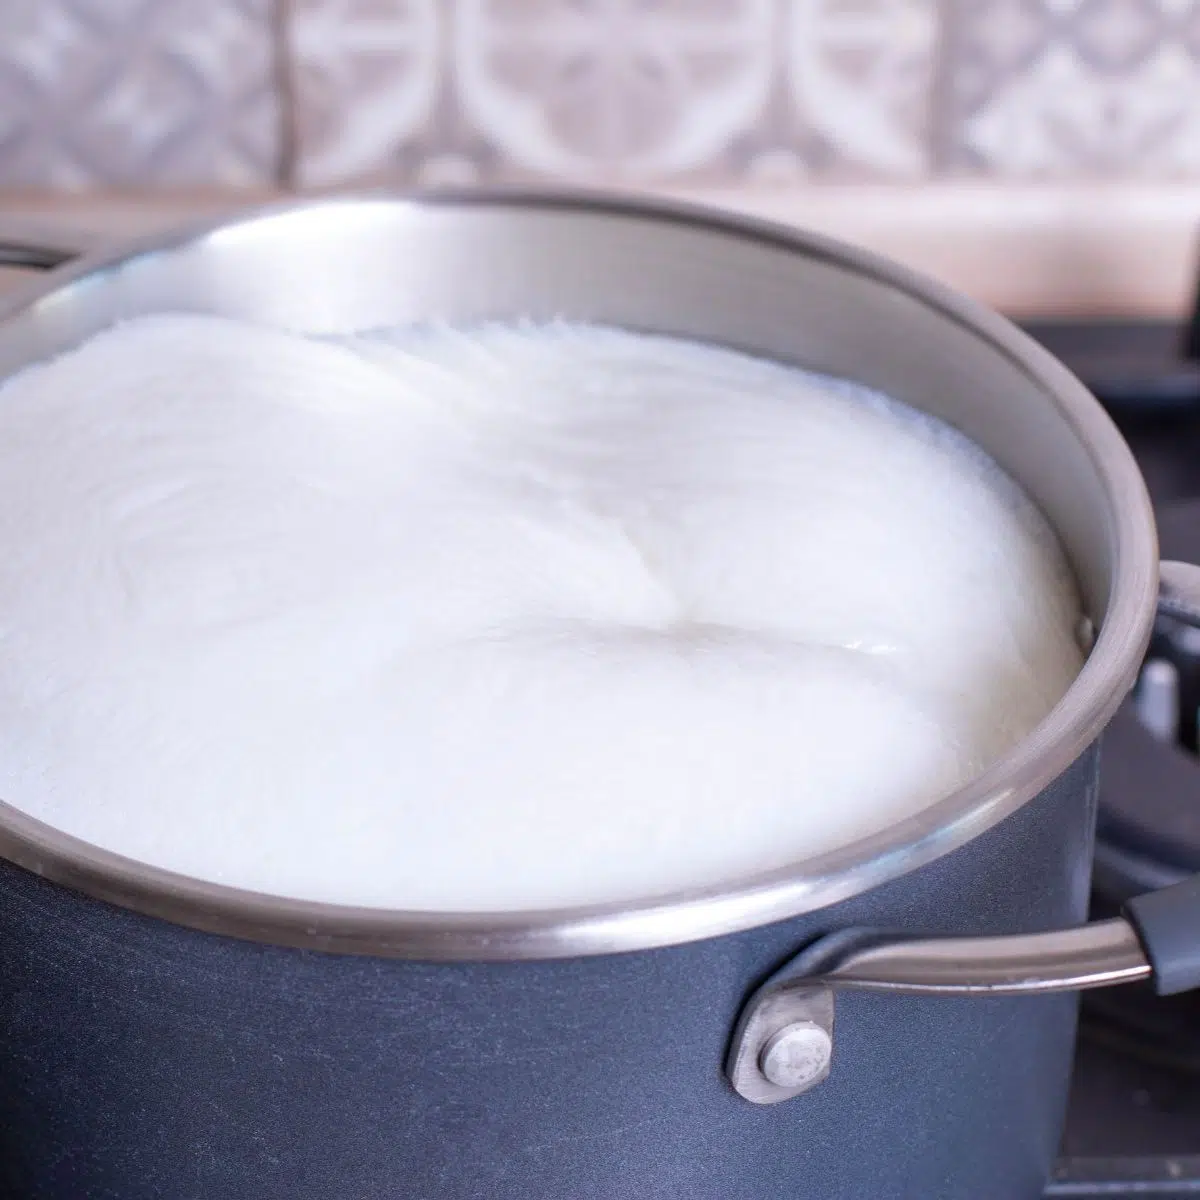 How to scald milk quickly for mashed potatoes with milk in a saucepan.